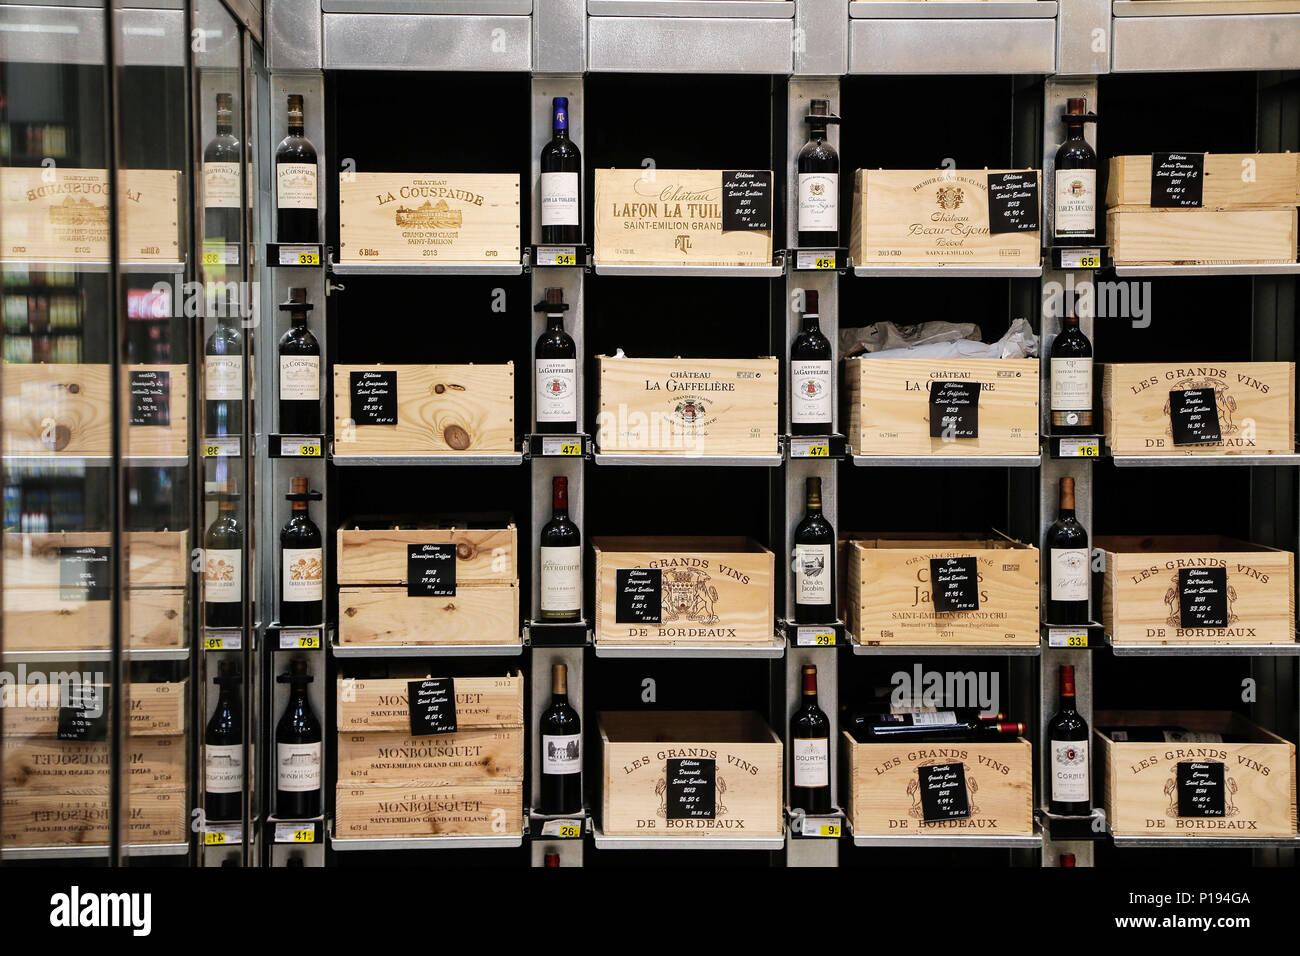 Wine fair in a 'Leclerc' hypermarket.  Great wine from Bordeaux and Saint-Emilion on display Stock Photo